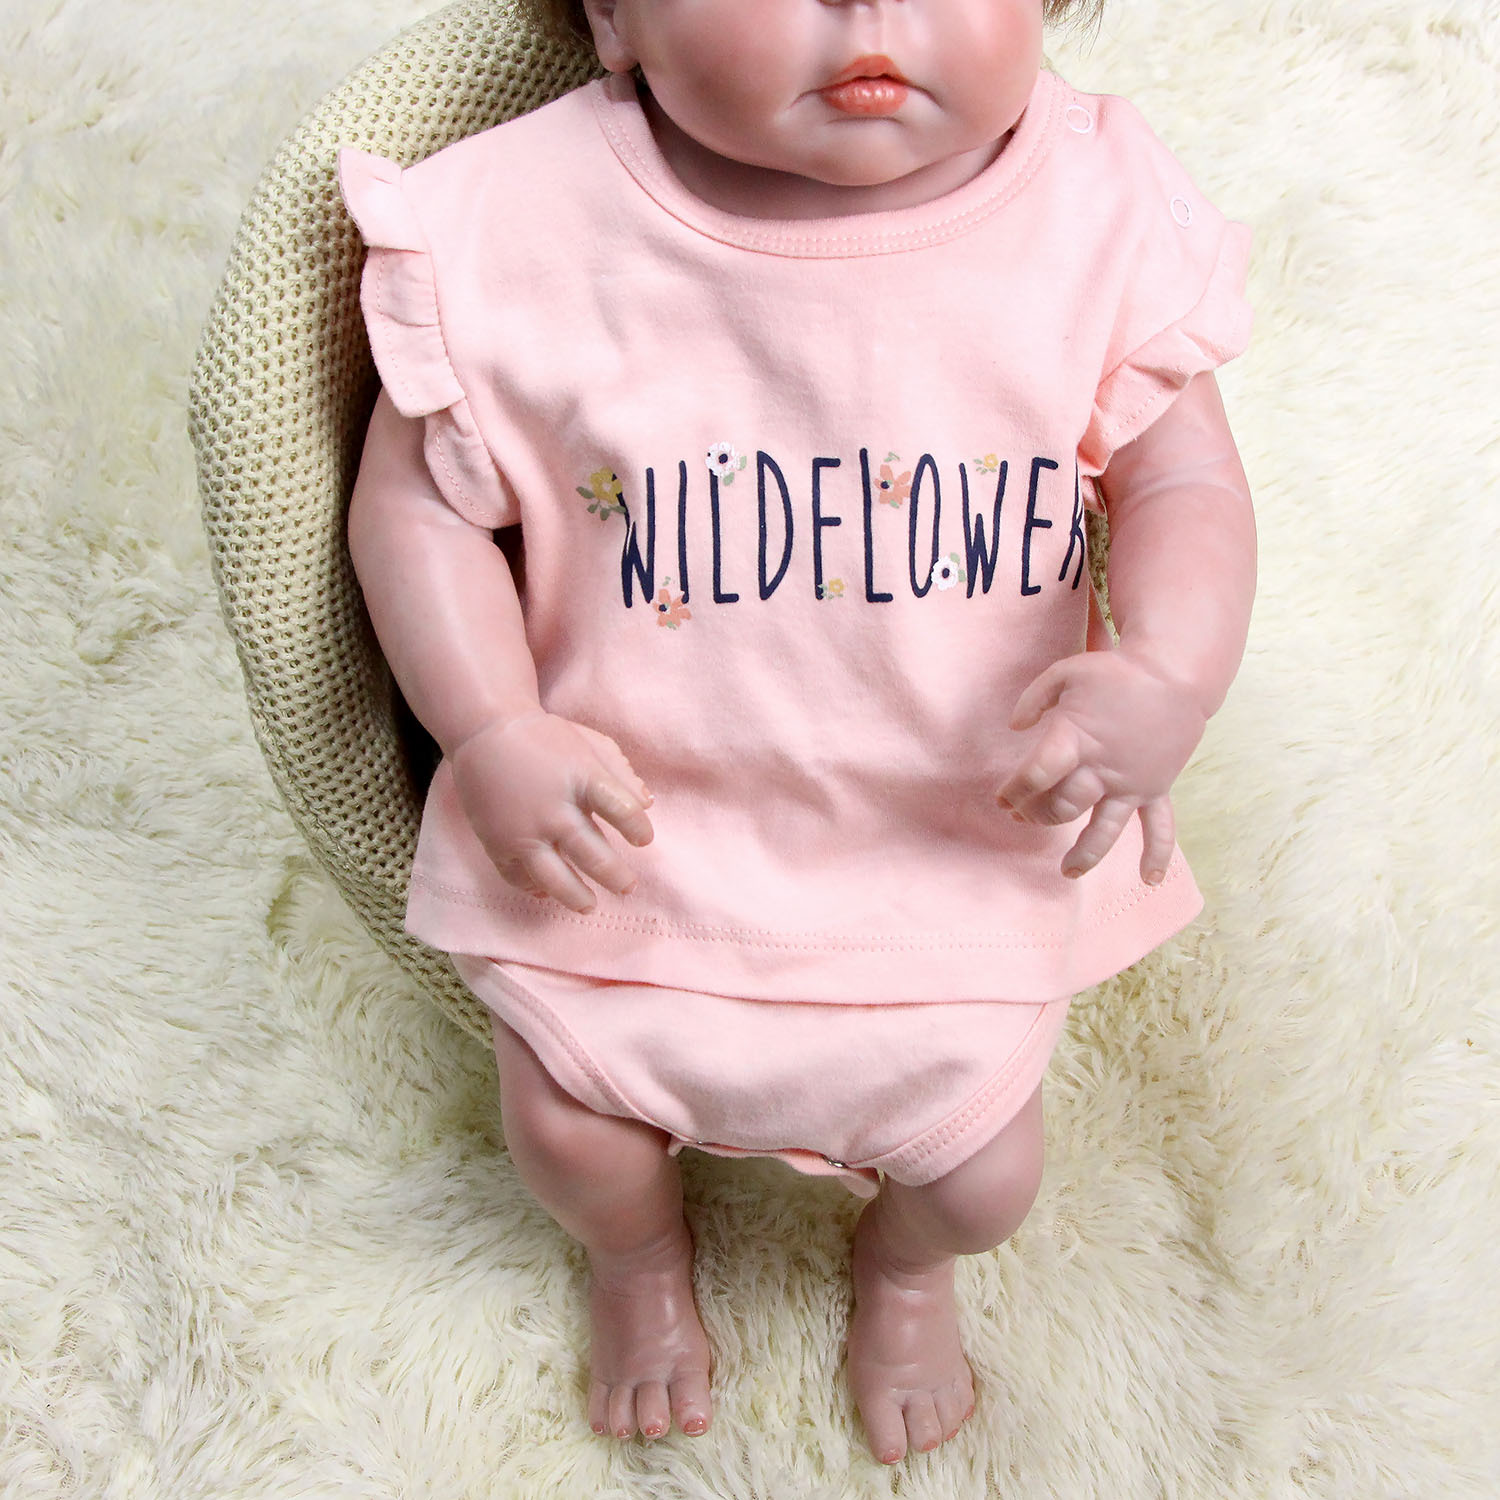 Baby onesies baby pink clothes young chi...